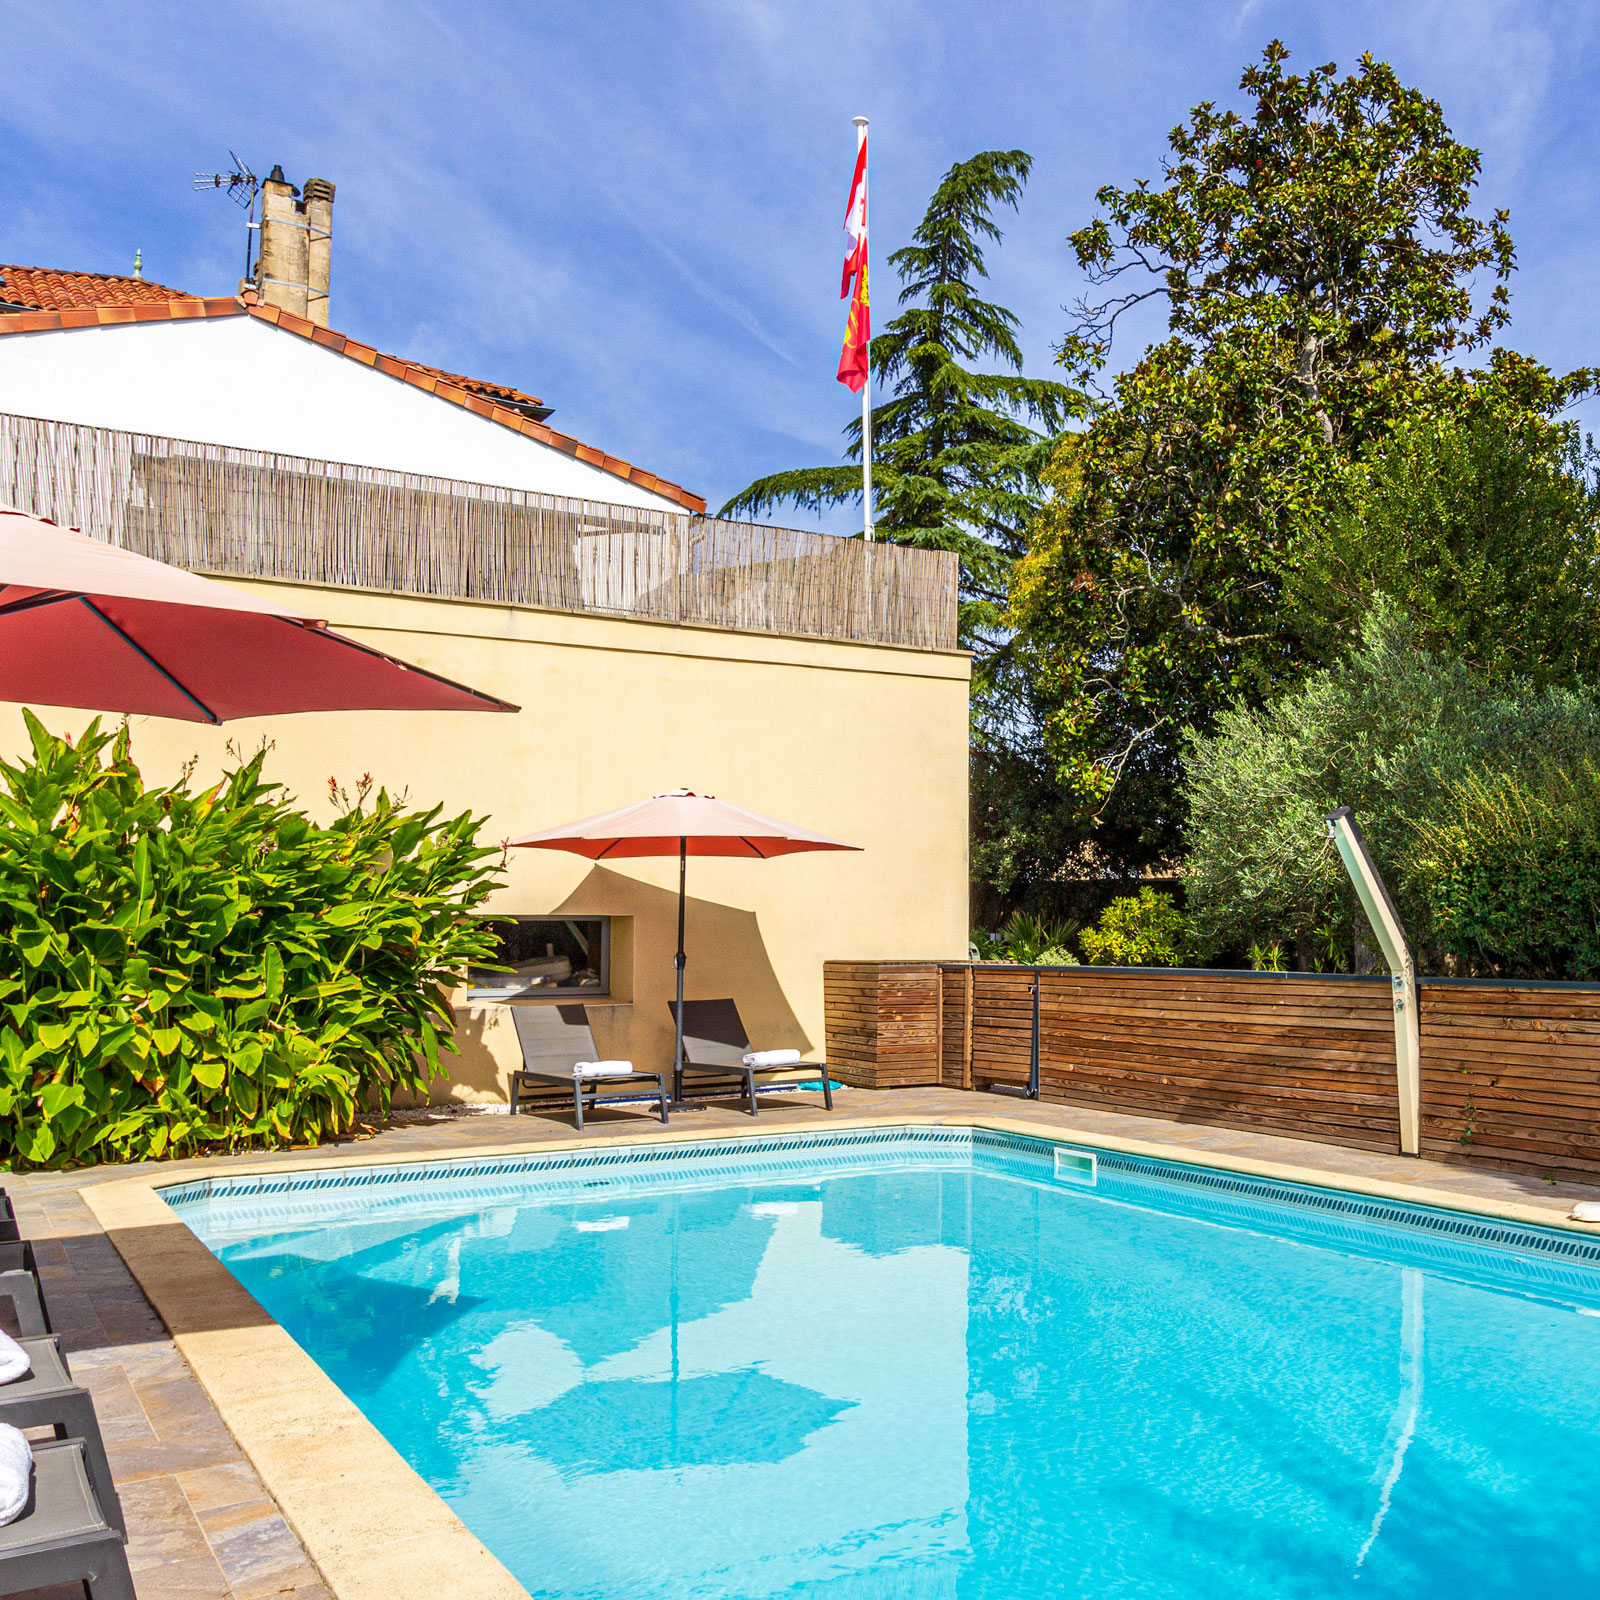 Villa Pin Napoleon, holiday villa with a private heated gated pool, walk to restaurants in Monsegur Gironde SW France